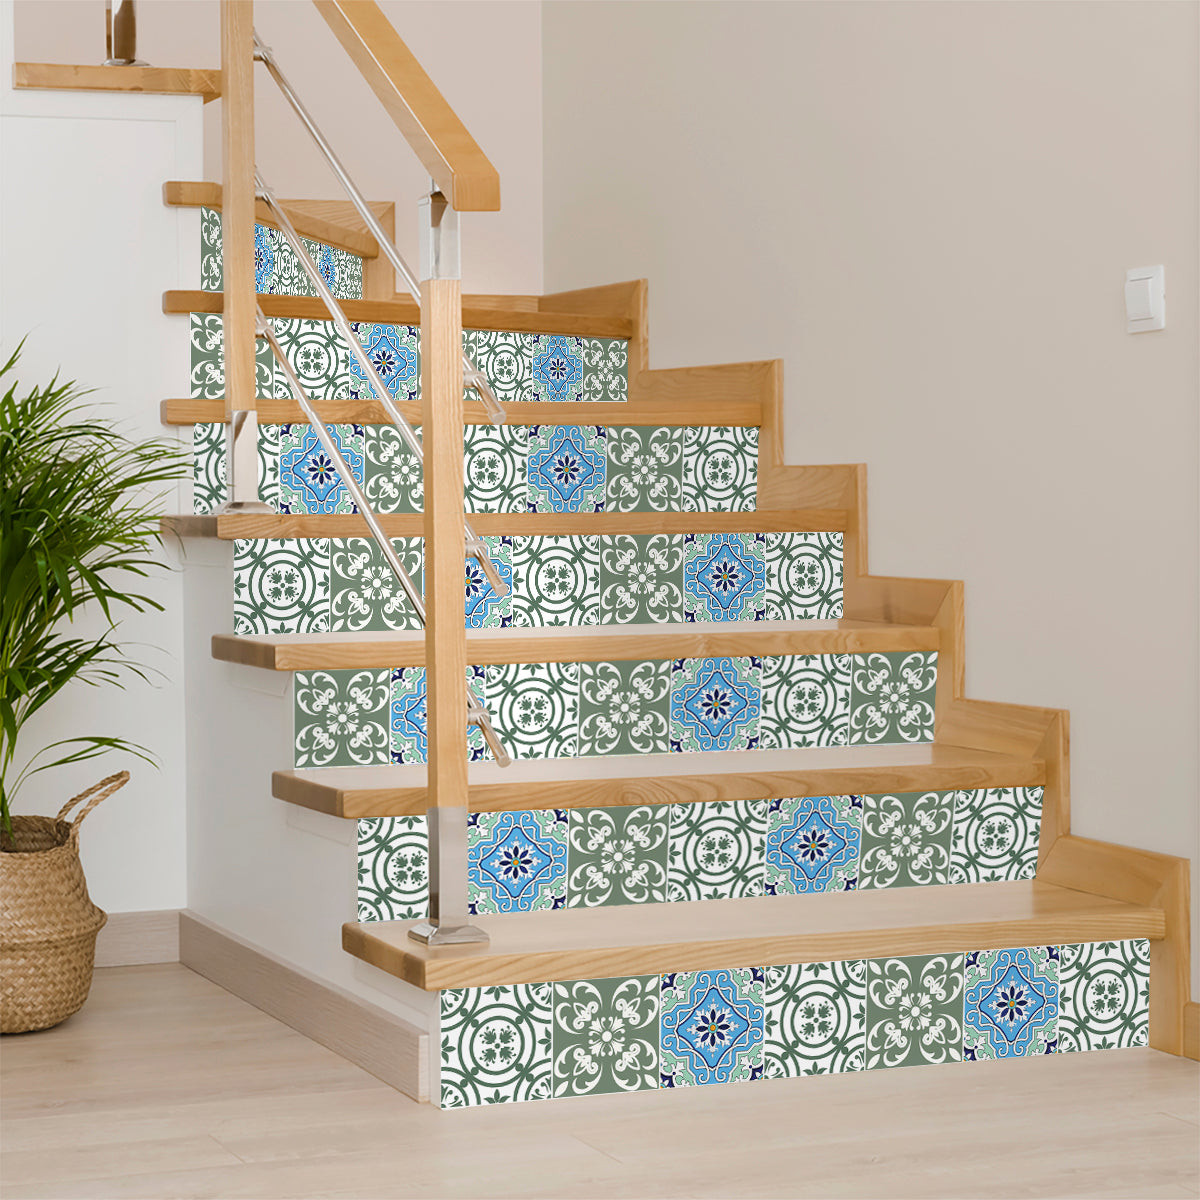 6" X 6" Sage And Aqua Floral Peel And Stick Removable Tiles-390885-1